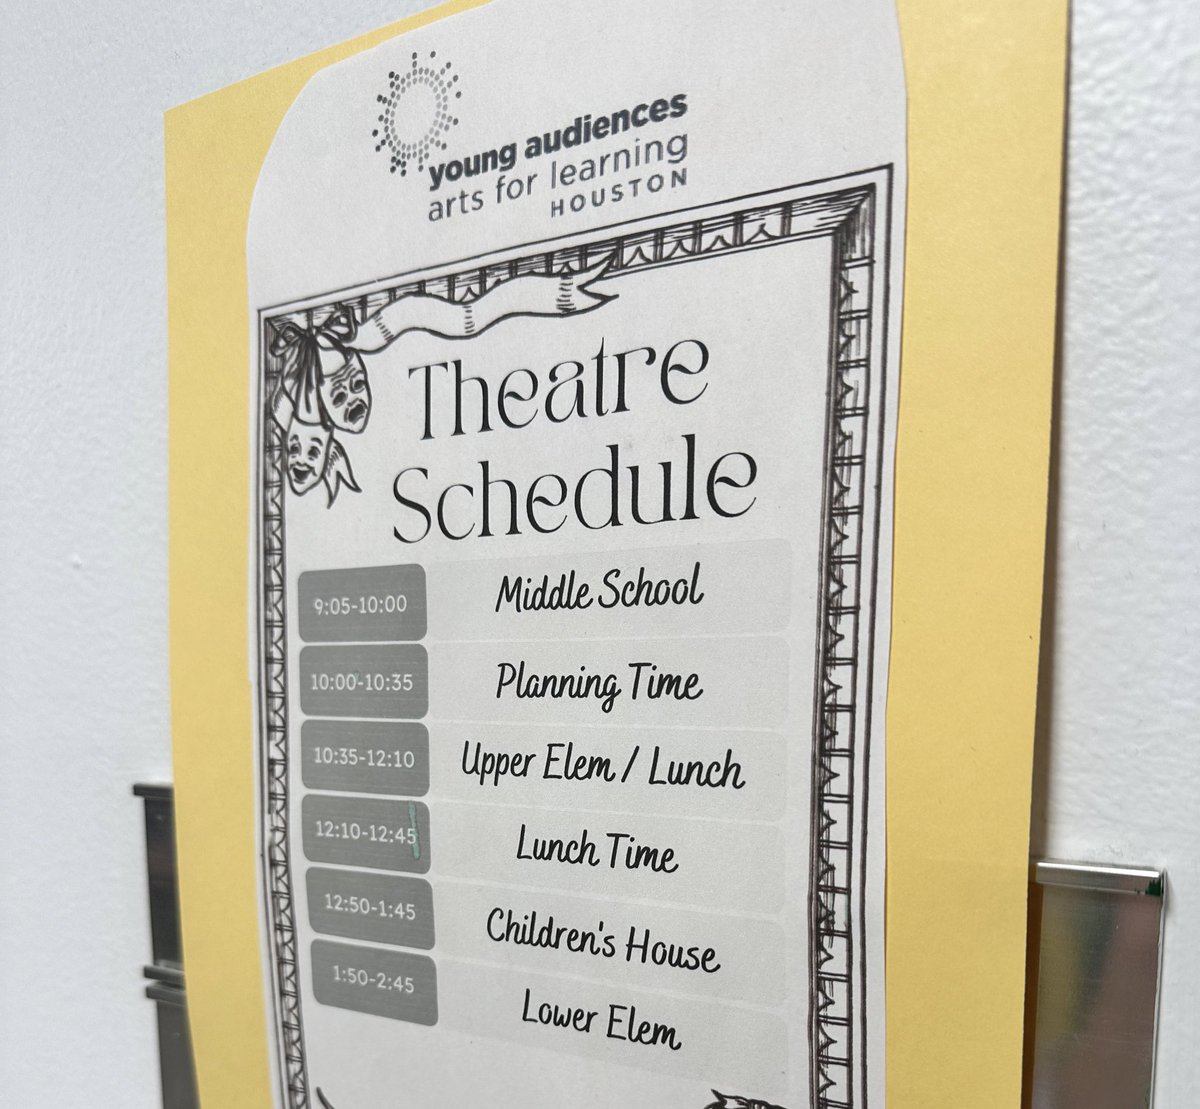 A day of theatre arts with @HoustonISD students! Students dusted off their tableau, creative writing, teamwork, and public speaking skills yesterday. #ArtsEd #ArtsIntegration #Houston 📚 🎭